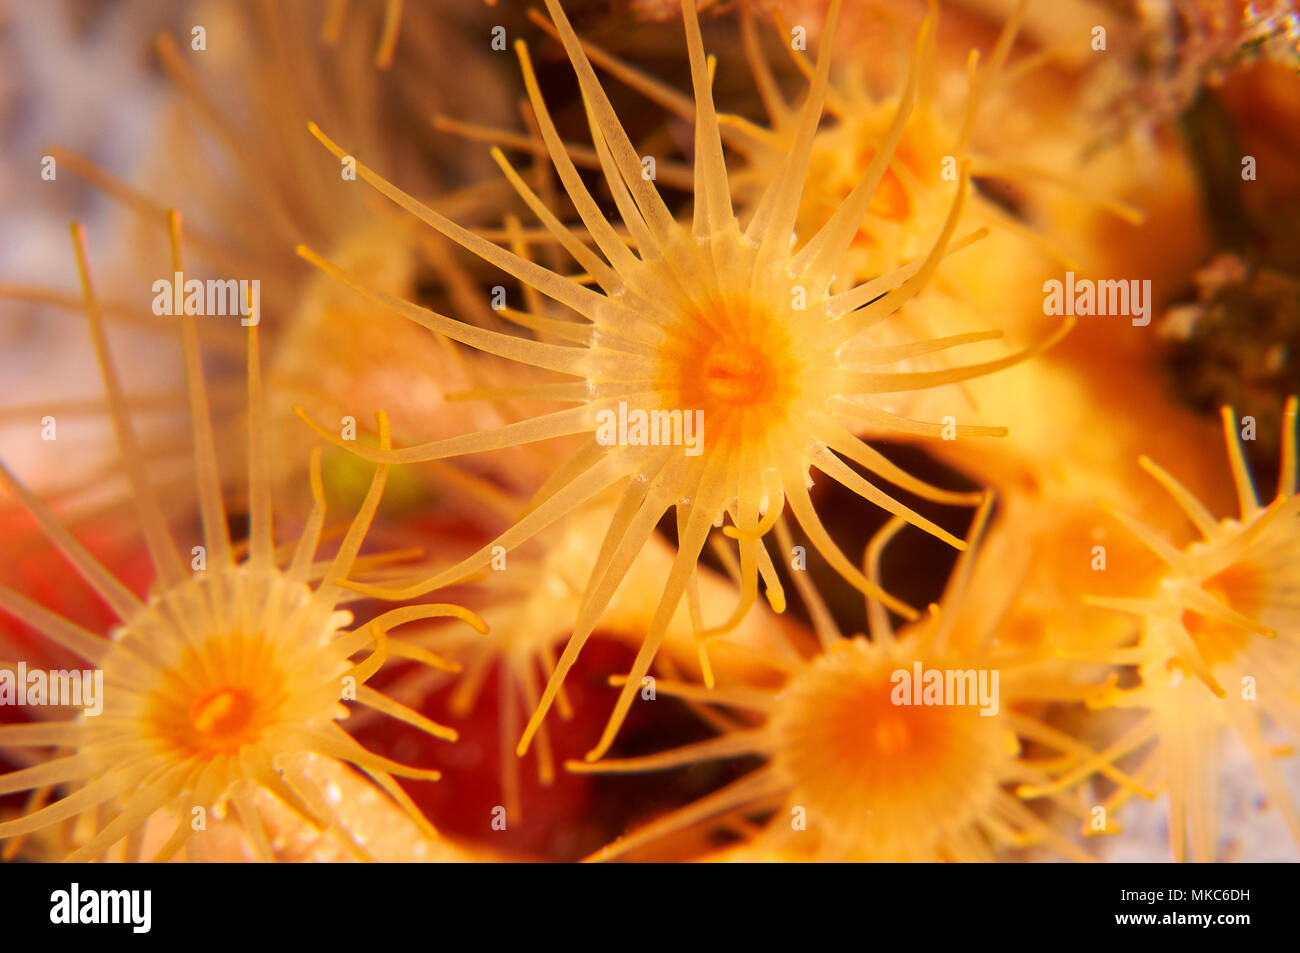 Macro detail of coral polyps from a yellow cluster anemone (Parazoanthus axinellae) in Mediterranean Sea (Formentera, Balearic Islands, Spain) Stock Photo